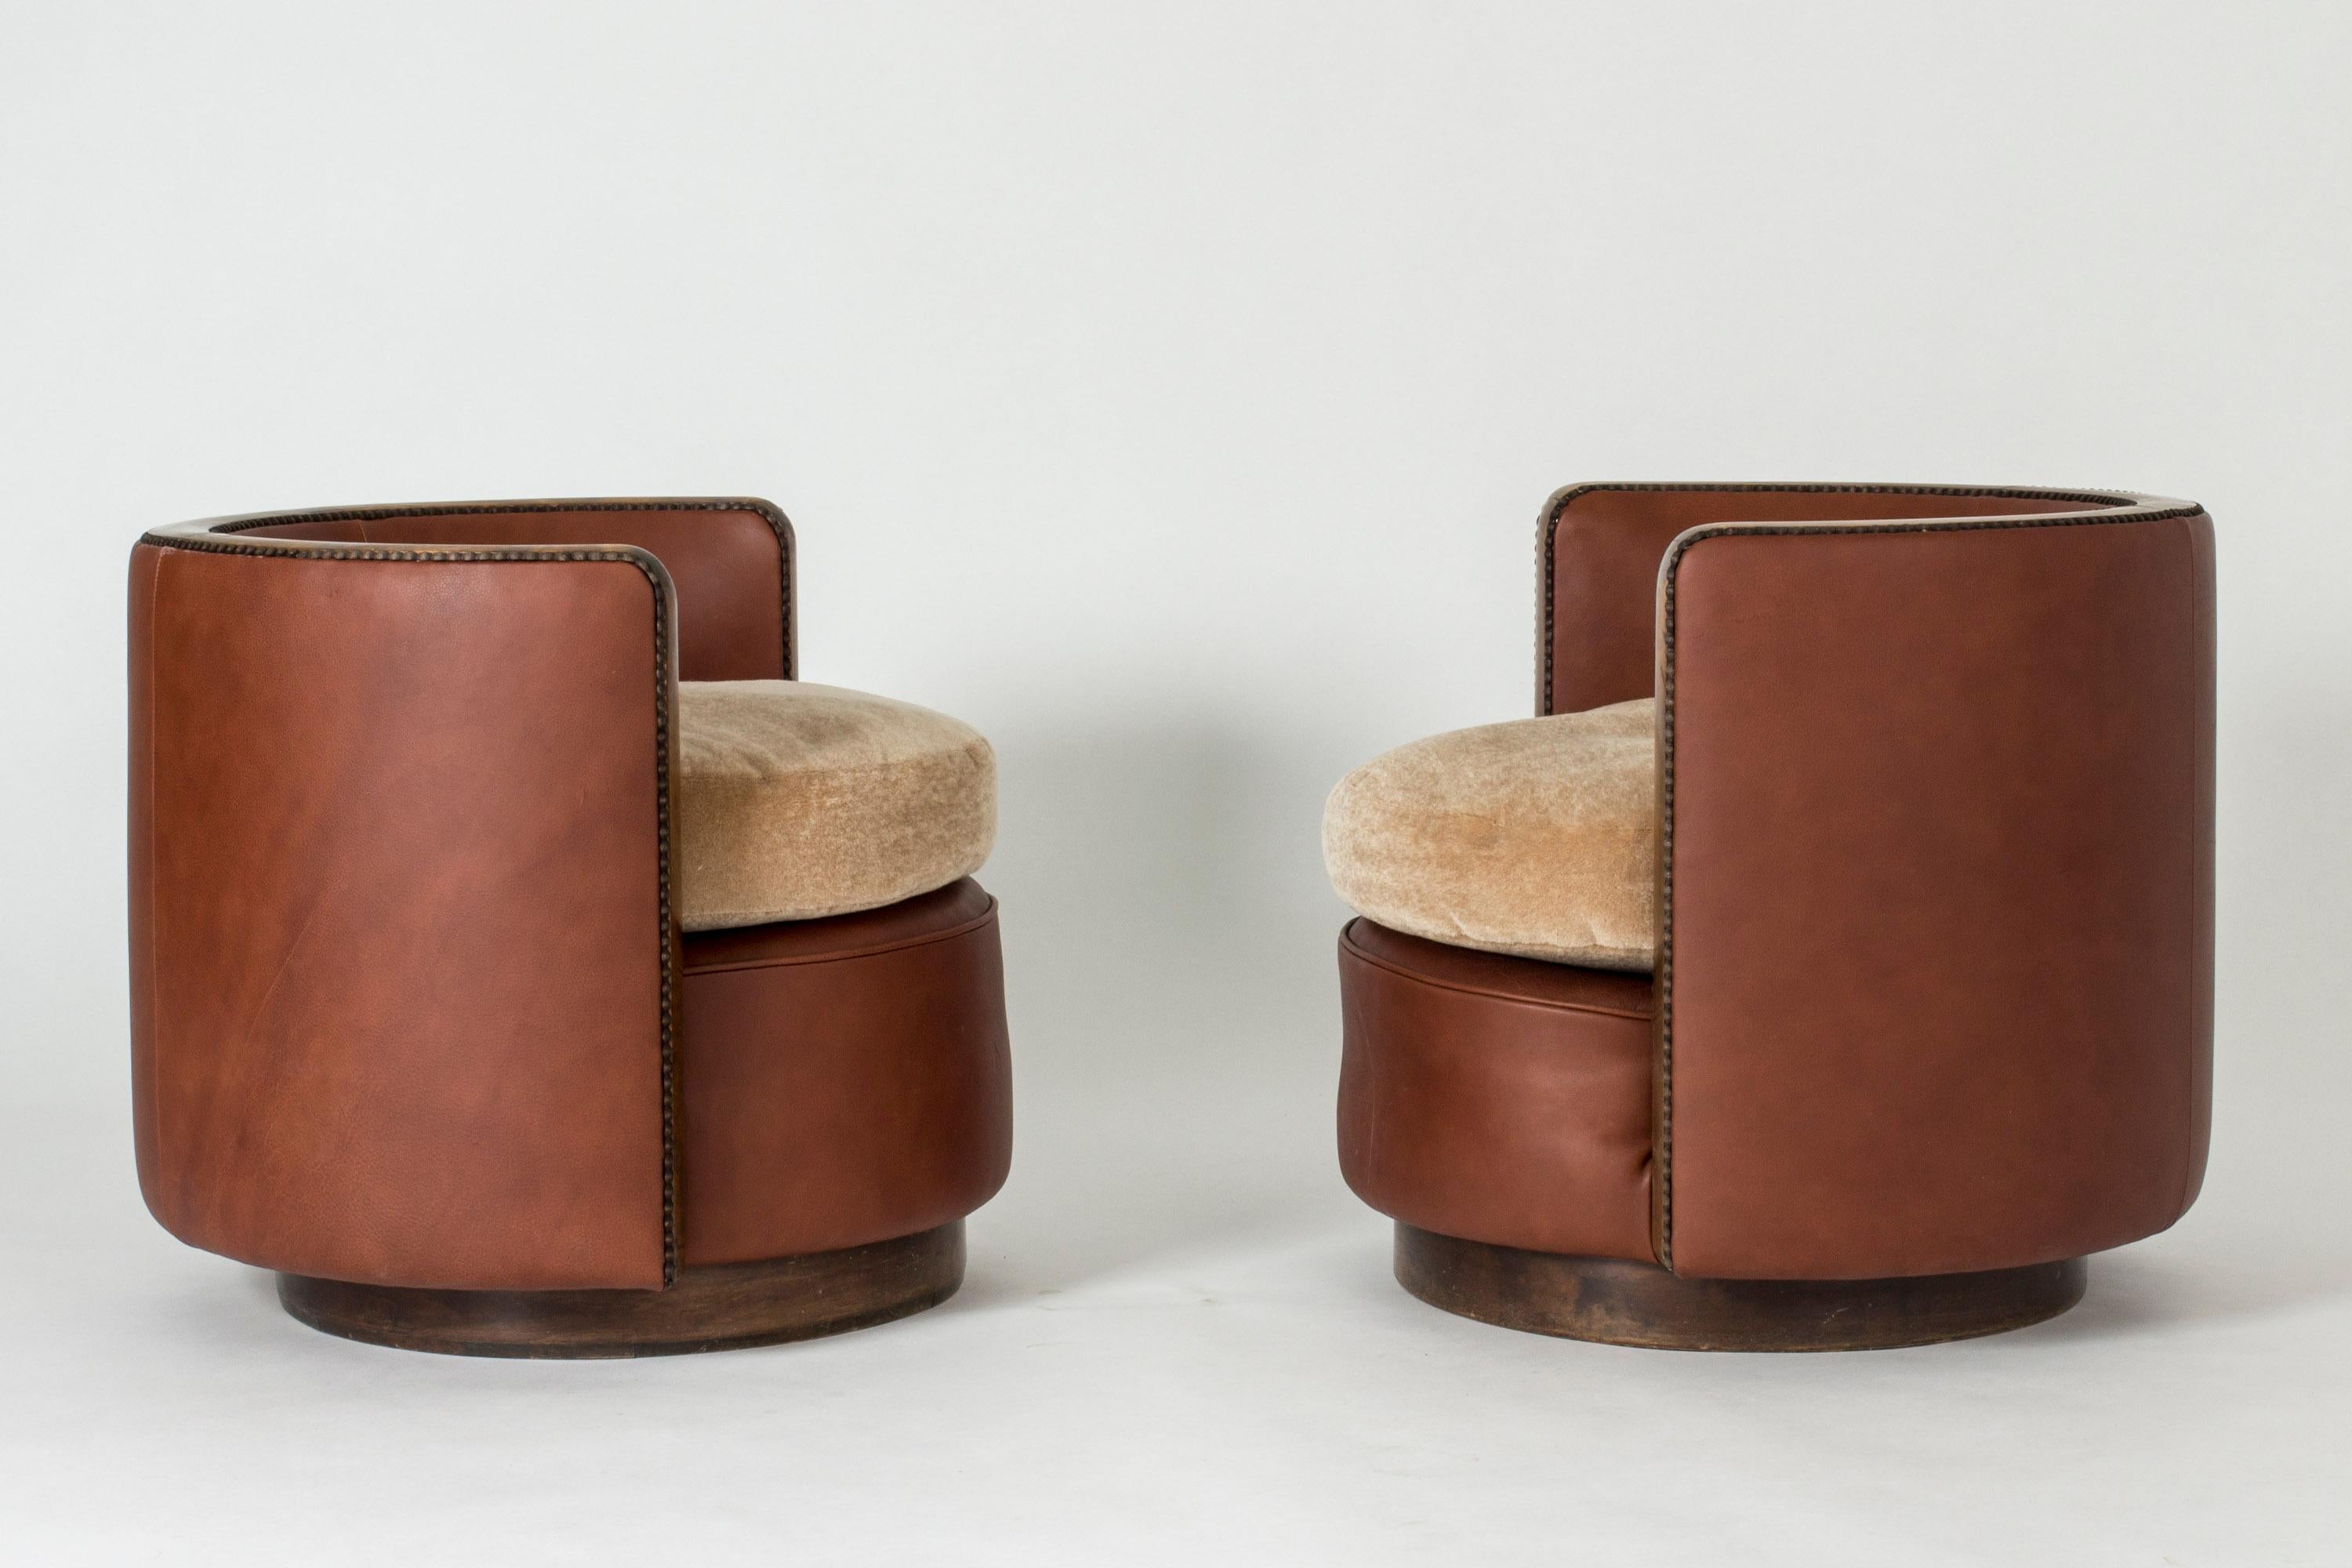 Pair of amazing Swedish 1930s lounge chairs, in a low, cylindrical design. Upholstered with leather and loose, mohair cushions. Wood details on the upper edge and front of the chairs. Restored to original condition. Price is for the pair. Seat